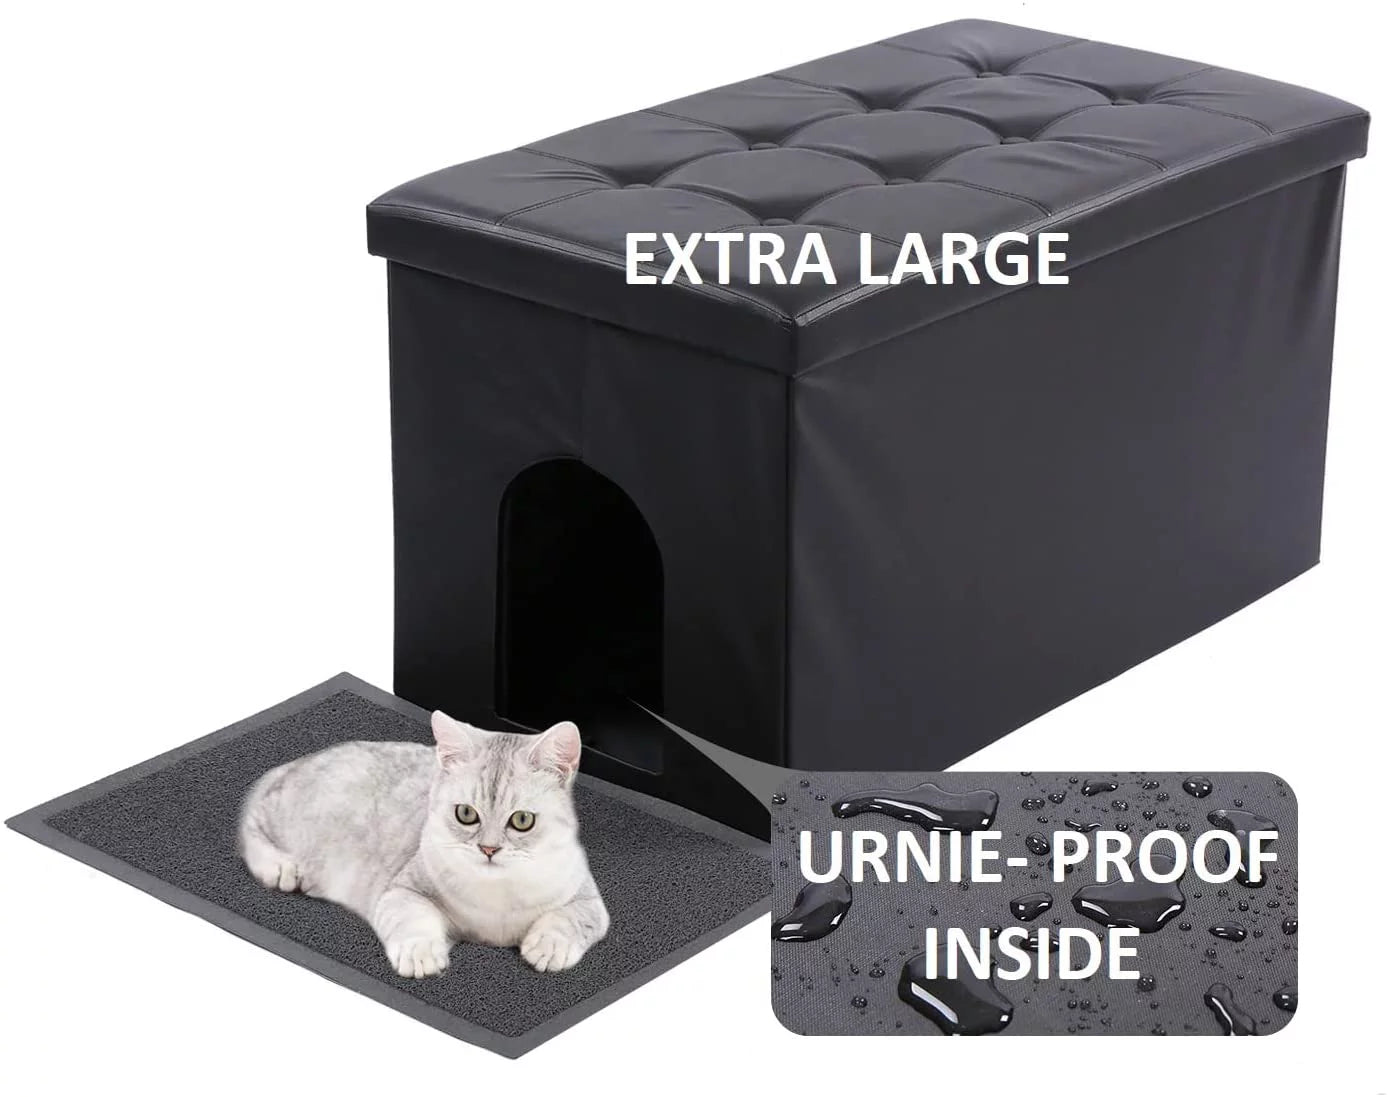 Cat Litter Box Enclosure Furniture Hidden, Cat Washroom Bench Storage Cabinet | Extra Large | Dog Proof | Waterproof Inside/Easy Clean | Easy Assembly | Odor Control |